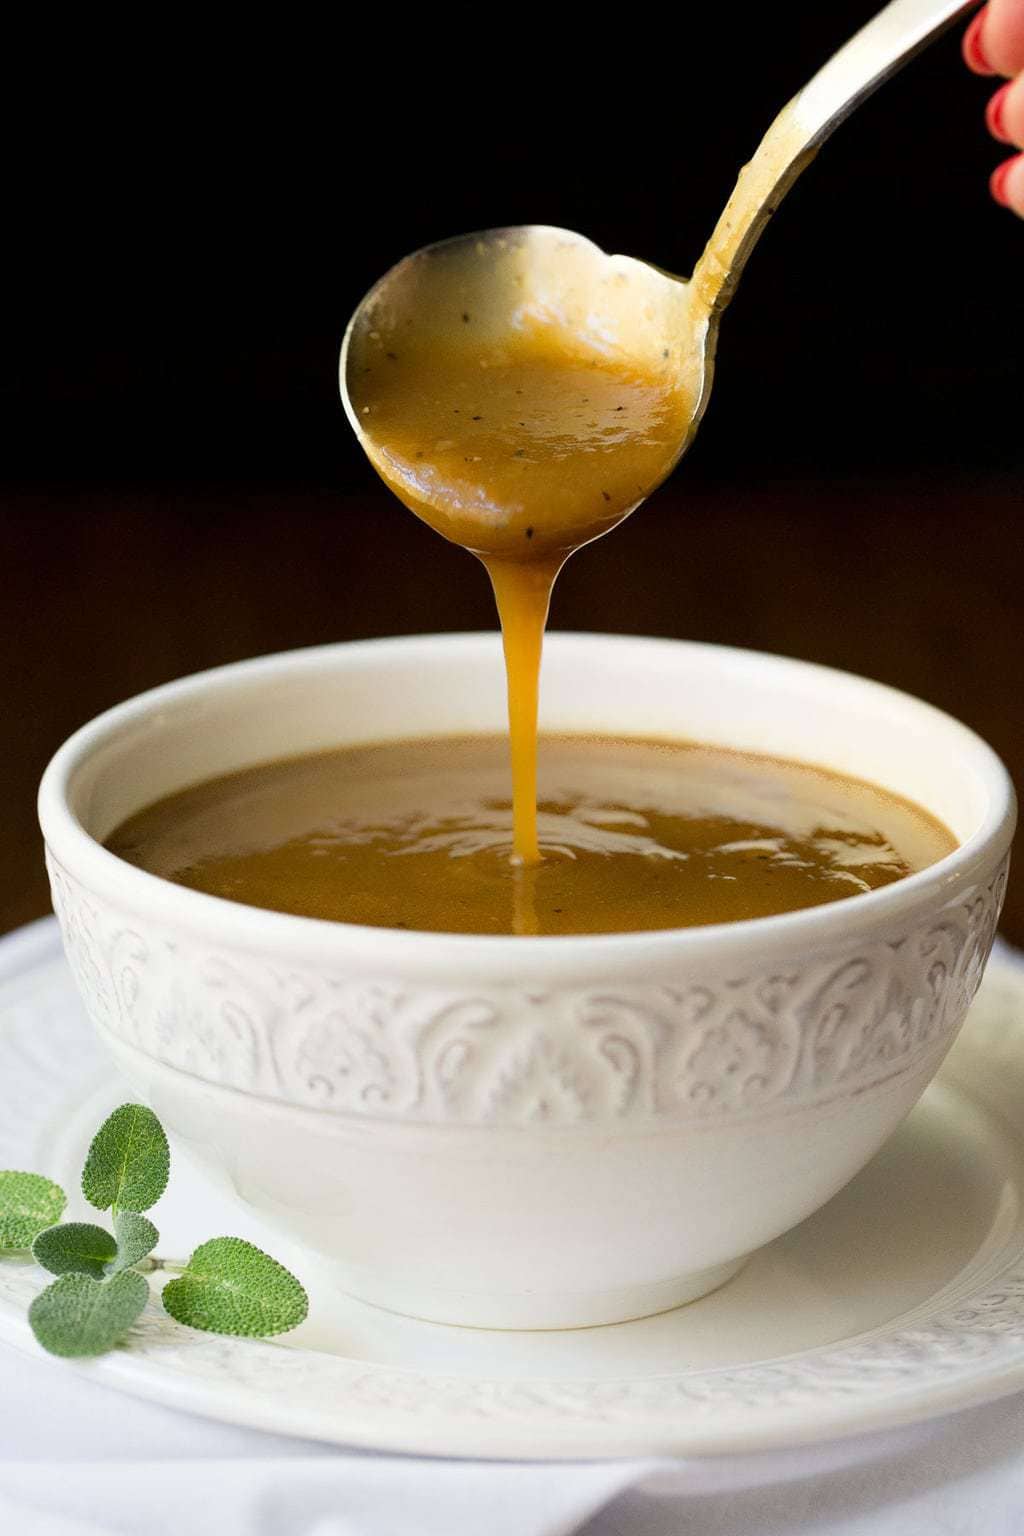 Vertical photo of Make-Ahead Gravy in a white bowl with a ladle.